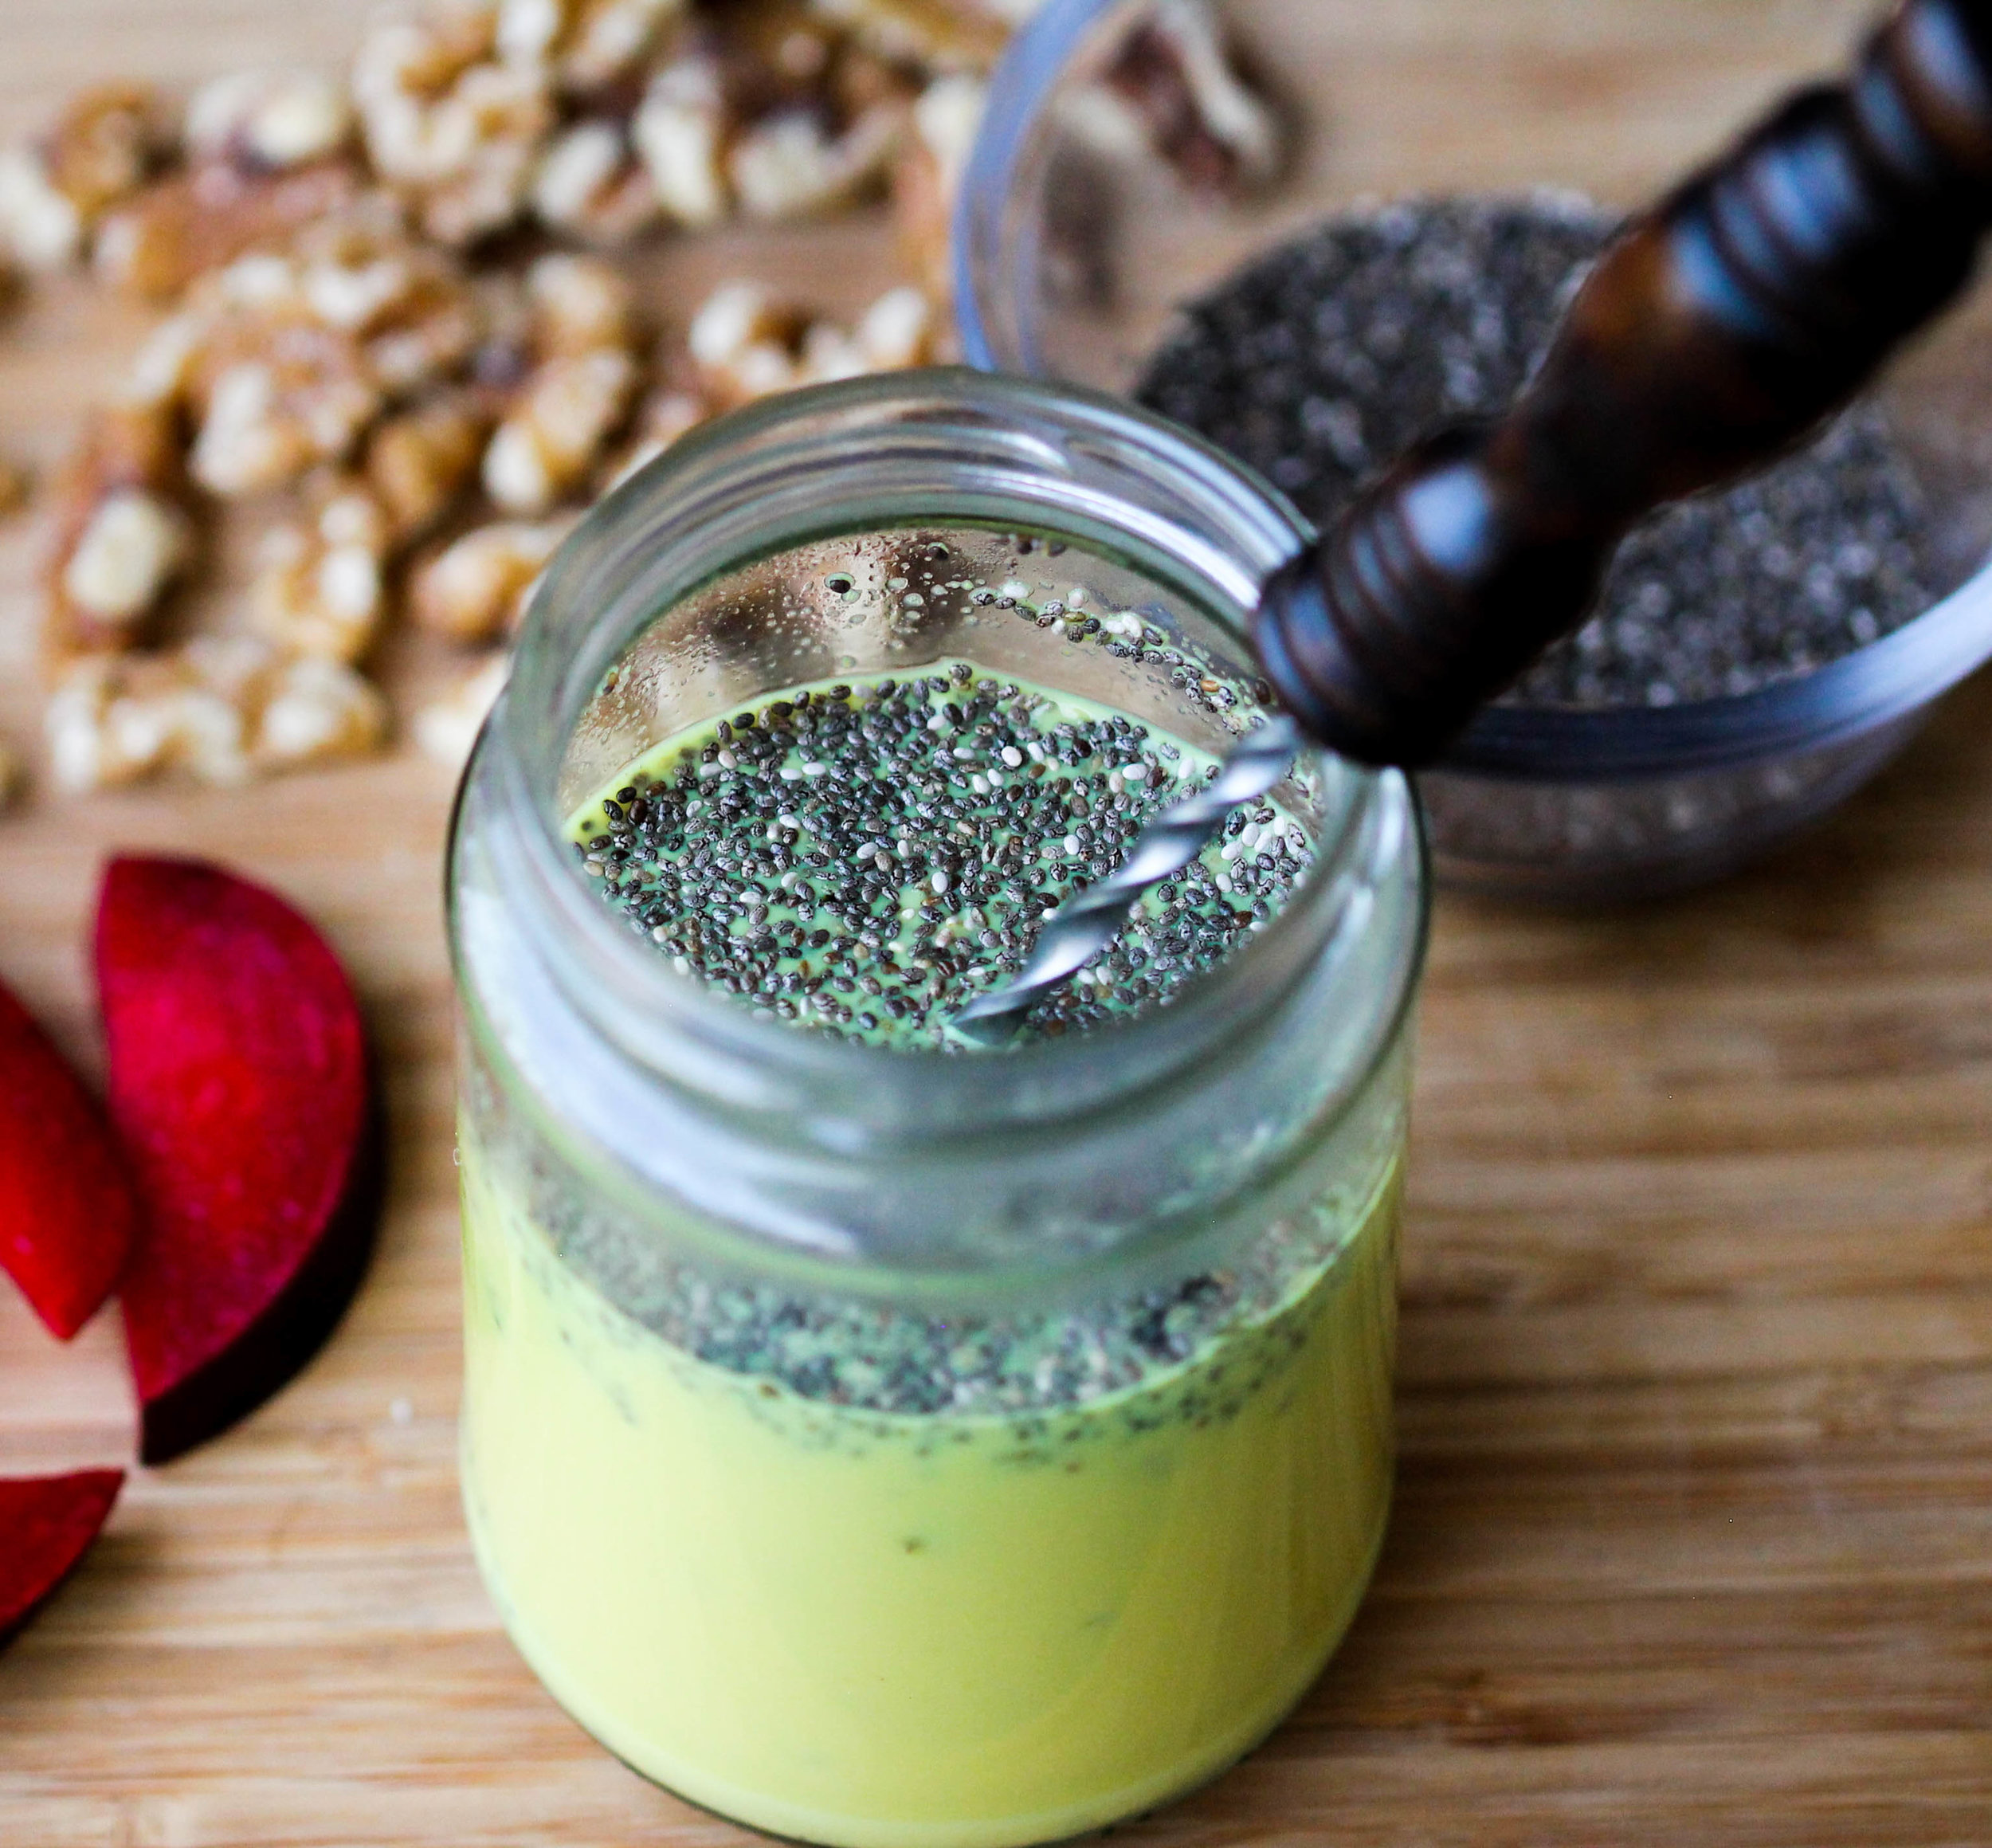 Take your breakfast-on-the-go to another level with Golden Milk Chia Pudding! Make it night before and have it ready for breakfast, snack, or dessert. It is flexible for vegans, non-vegans, gluten-free, paleo lifestyle!